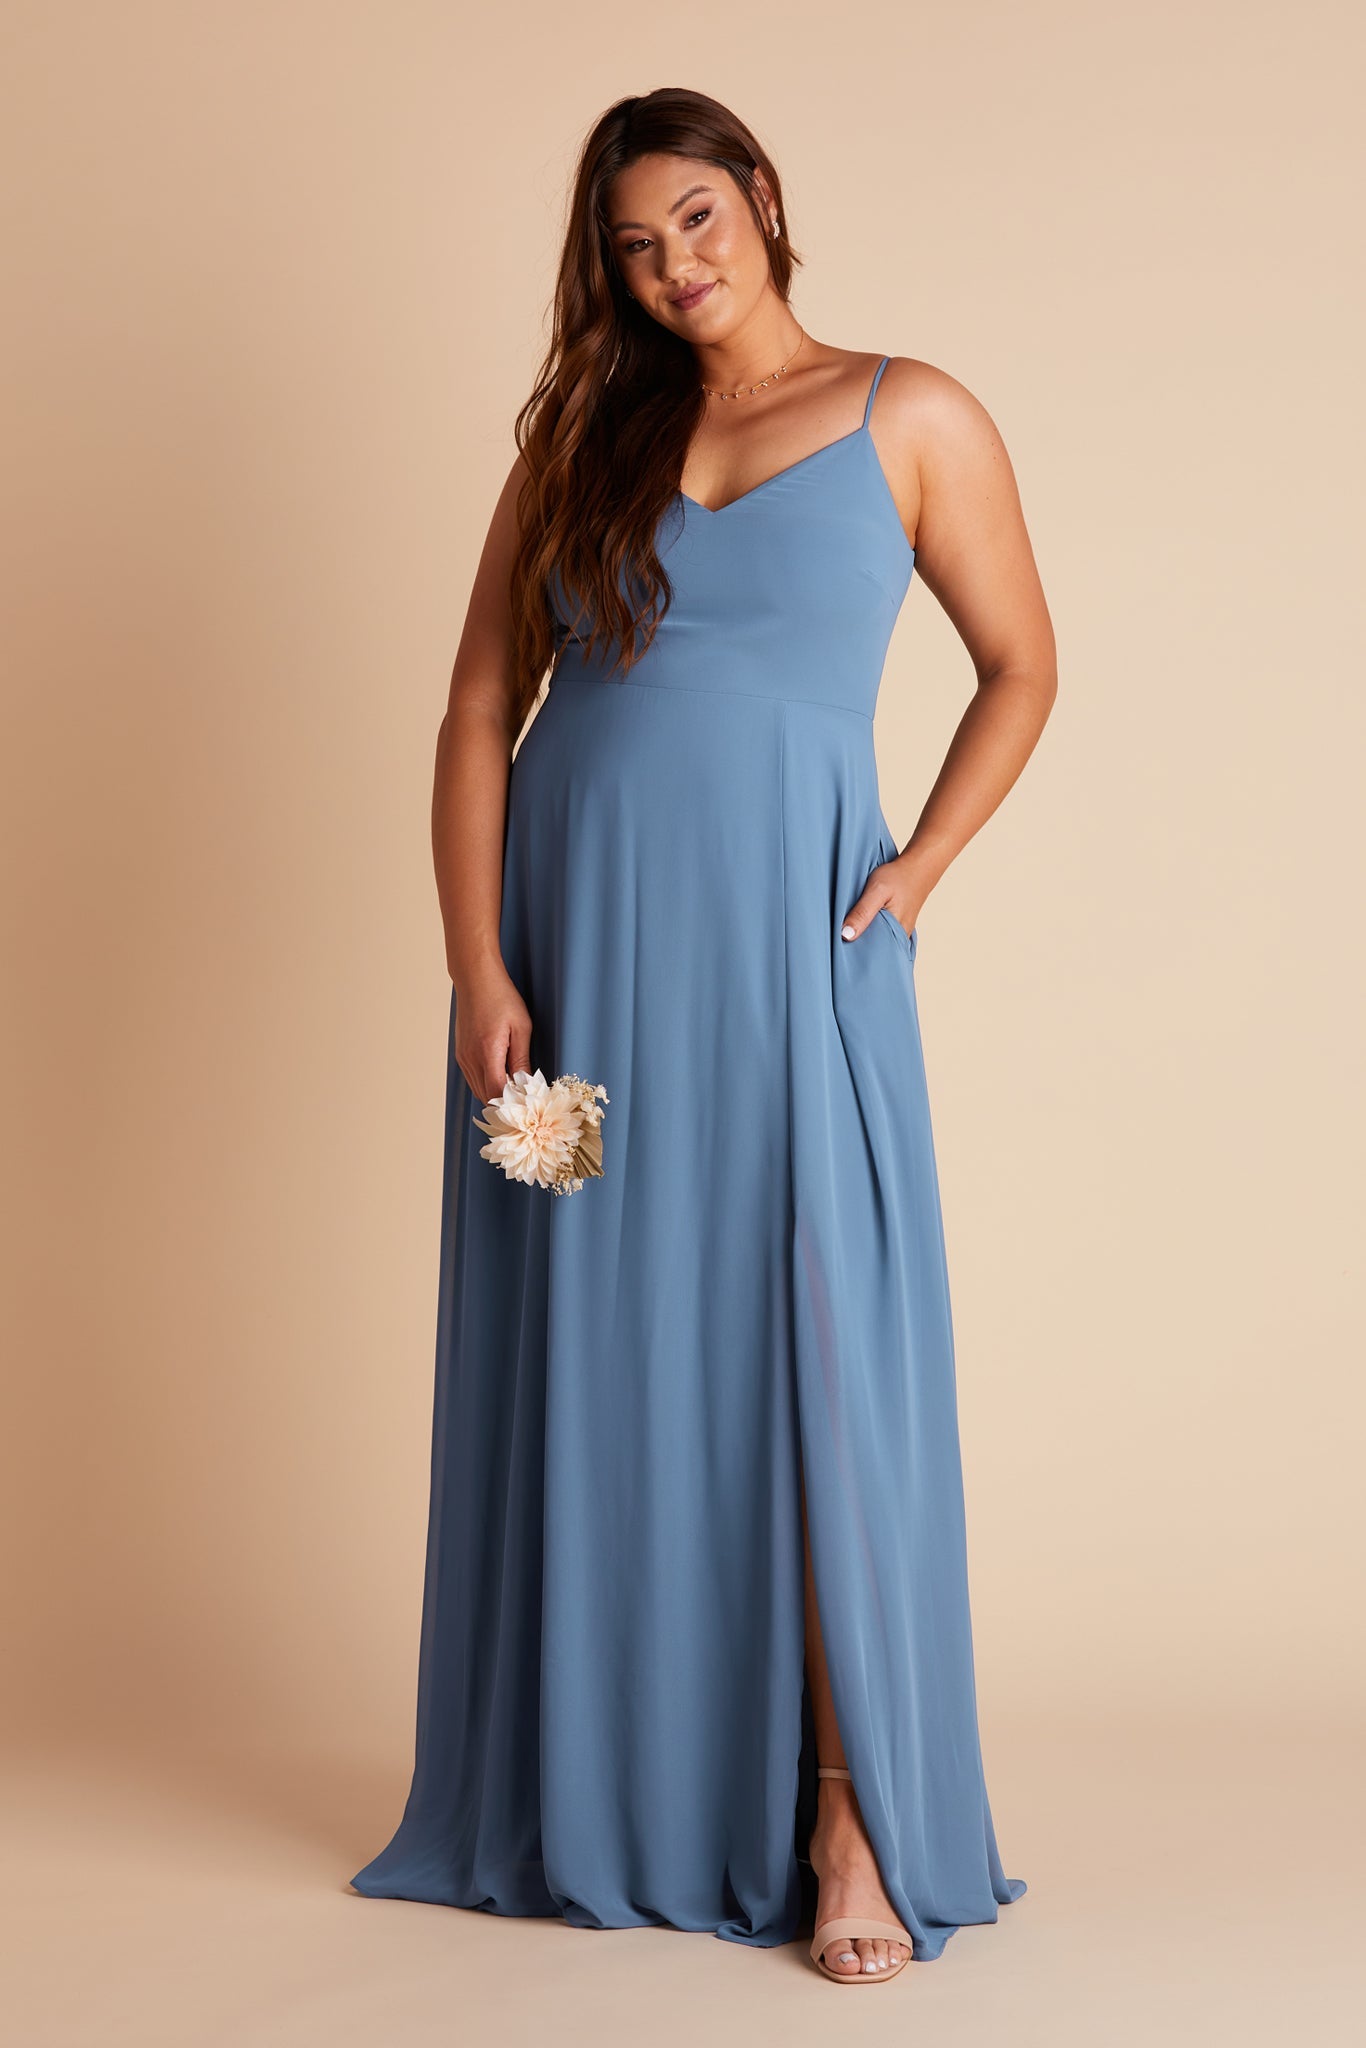 Devin convertible plus size bridesmaids dress with slit in twilight blue chiffon by Birdy Grey, front view with hand in pocket